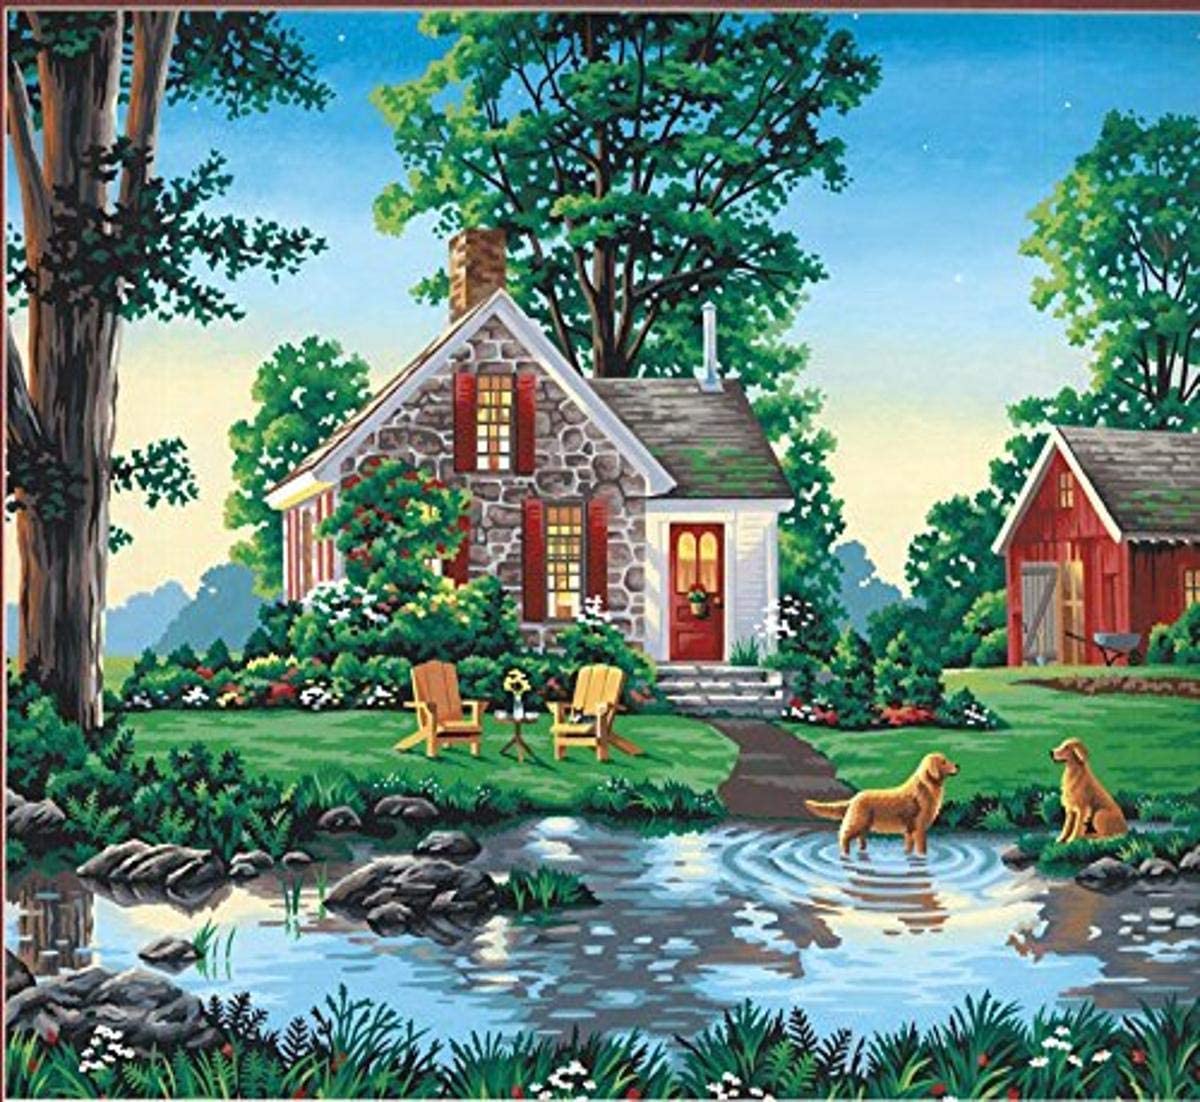 Dimensions Dogs and Summer Cottage Paint by Numbers for Adults, 20' W x 16' L